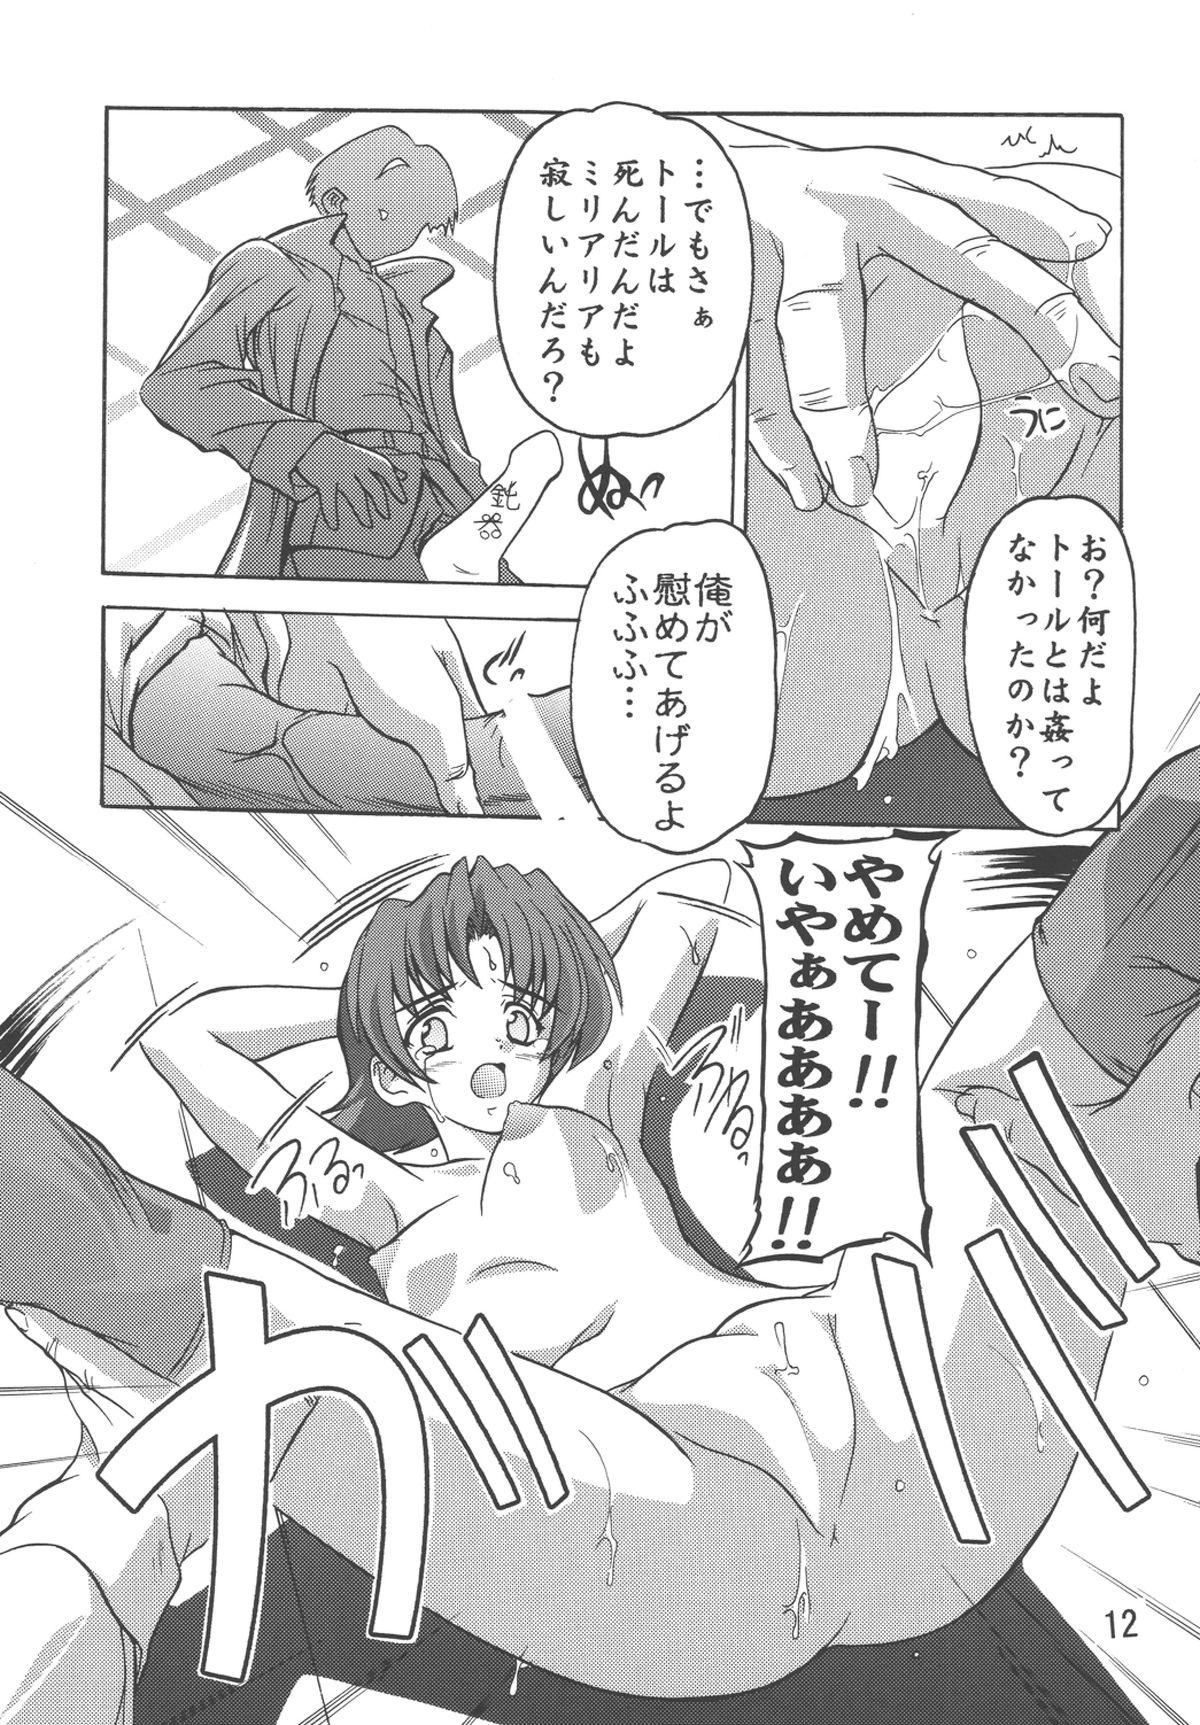 Squirting Miriallia in GUNDAM SEED - Gundam seed Awesome - Page 11